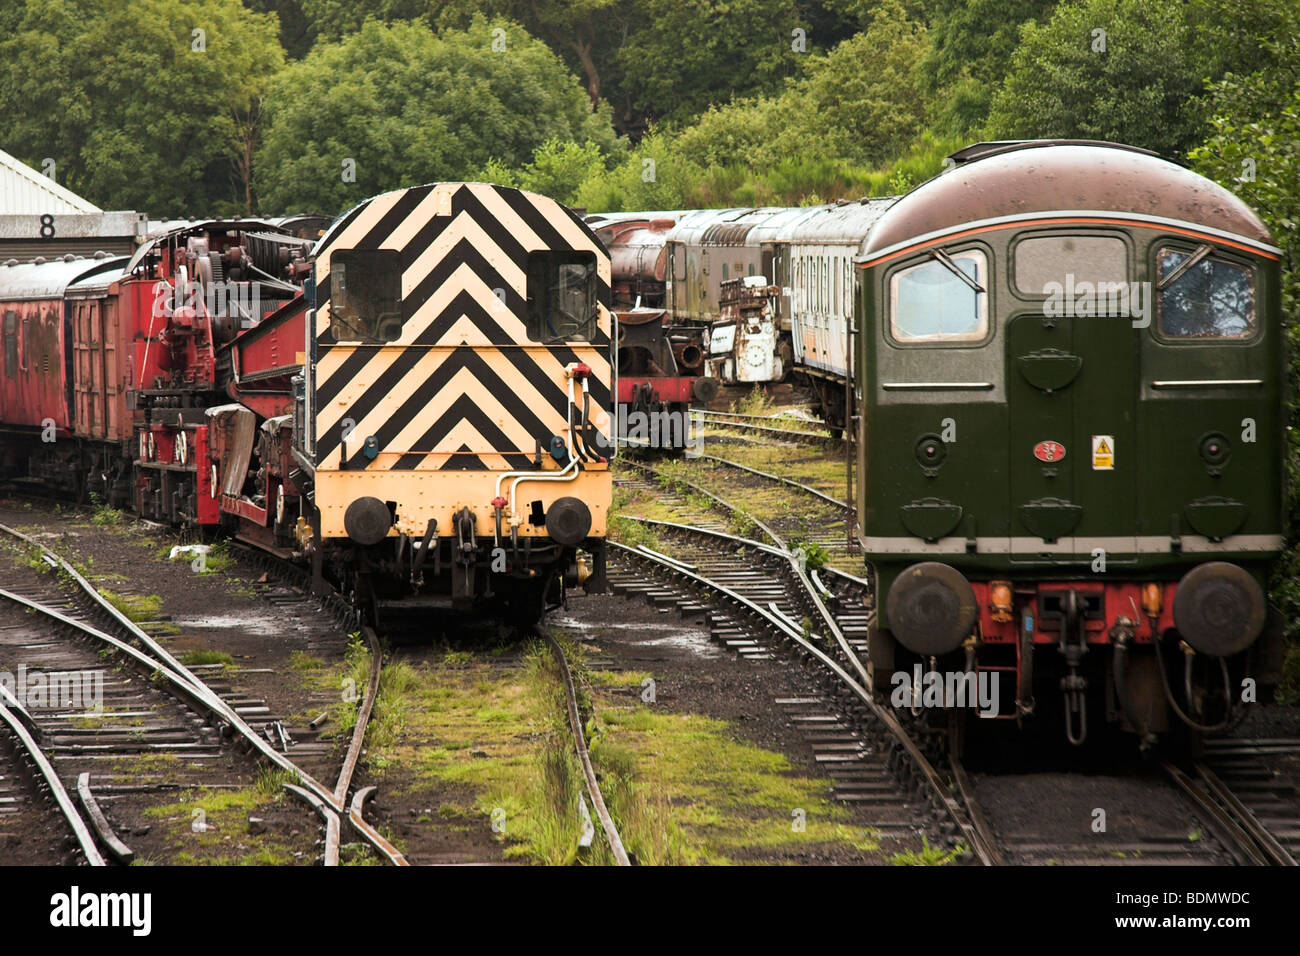 Old carriages in a siding, North Yorkshire, England, UK Stock Photo